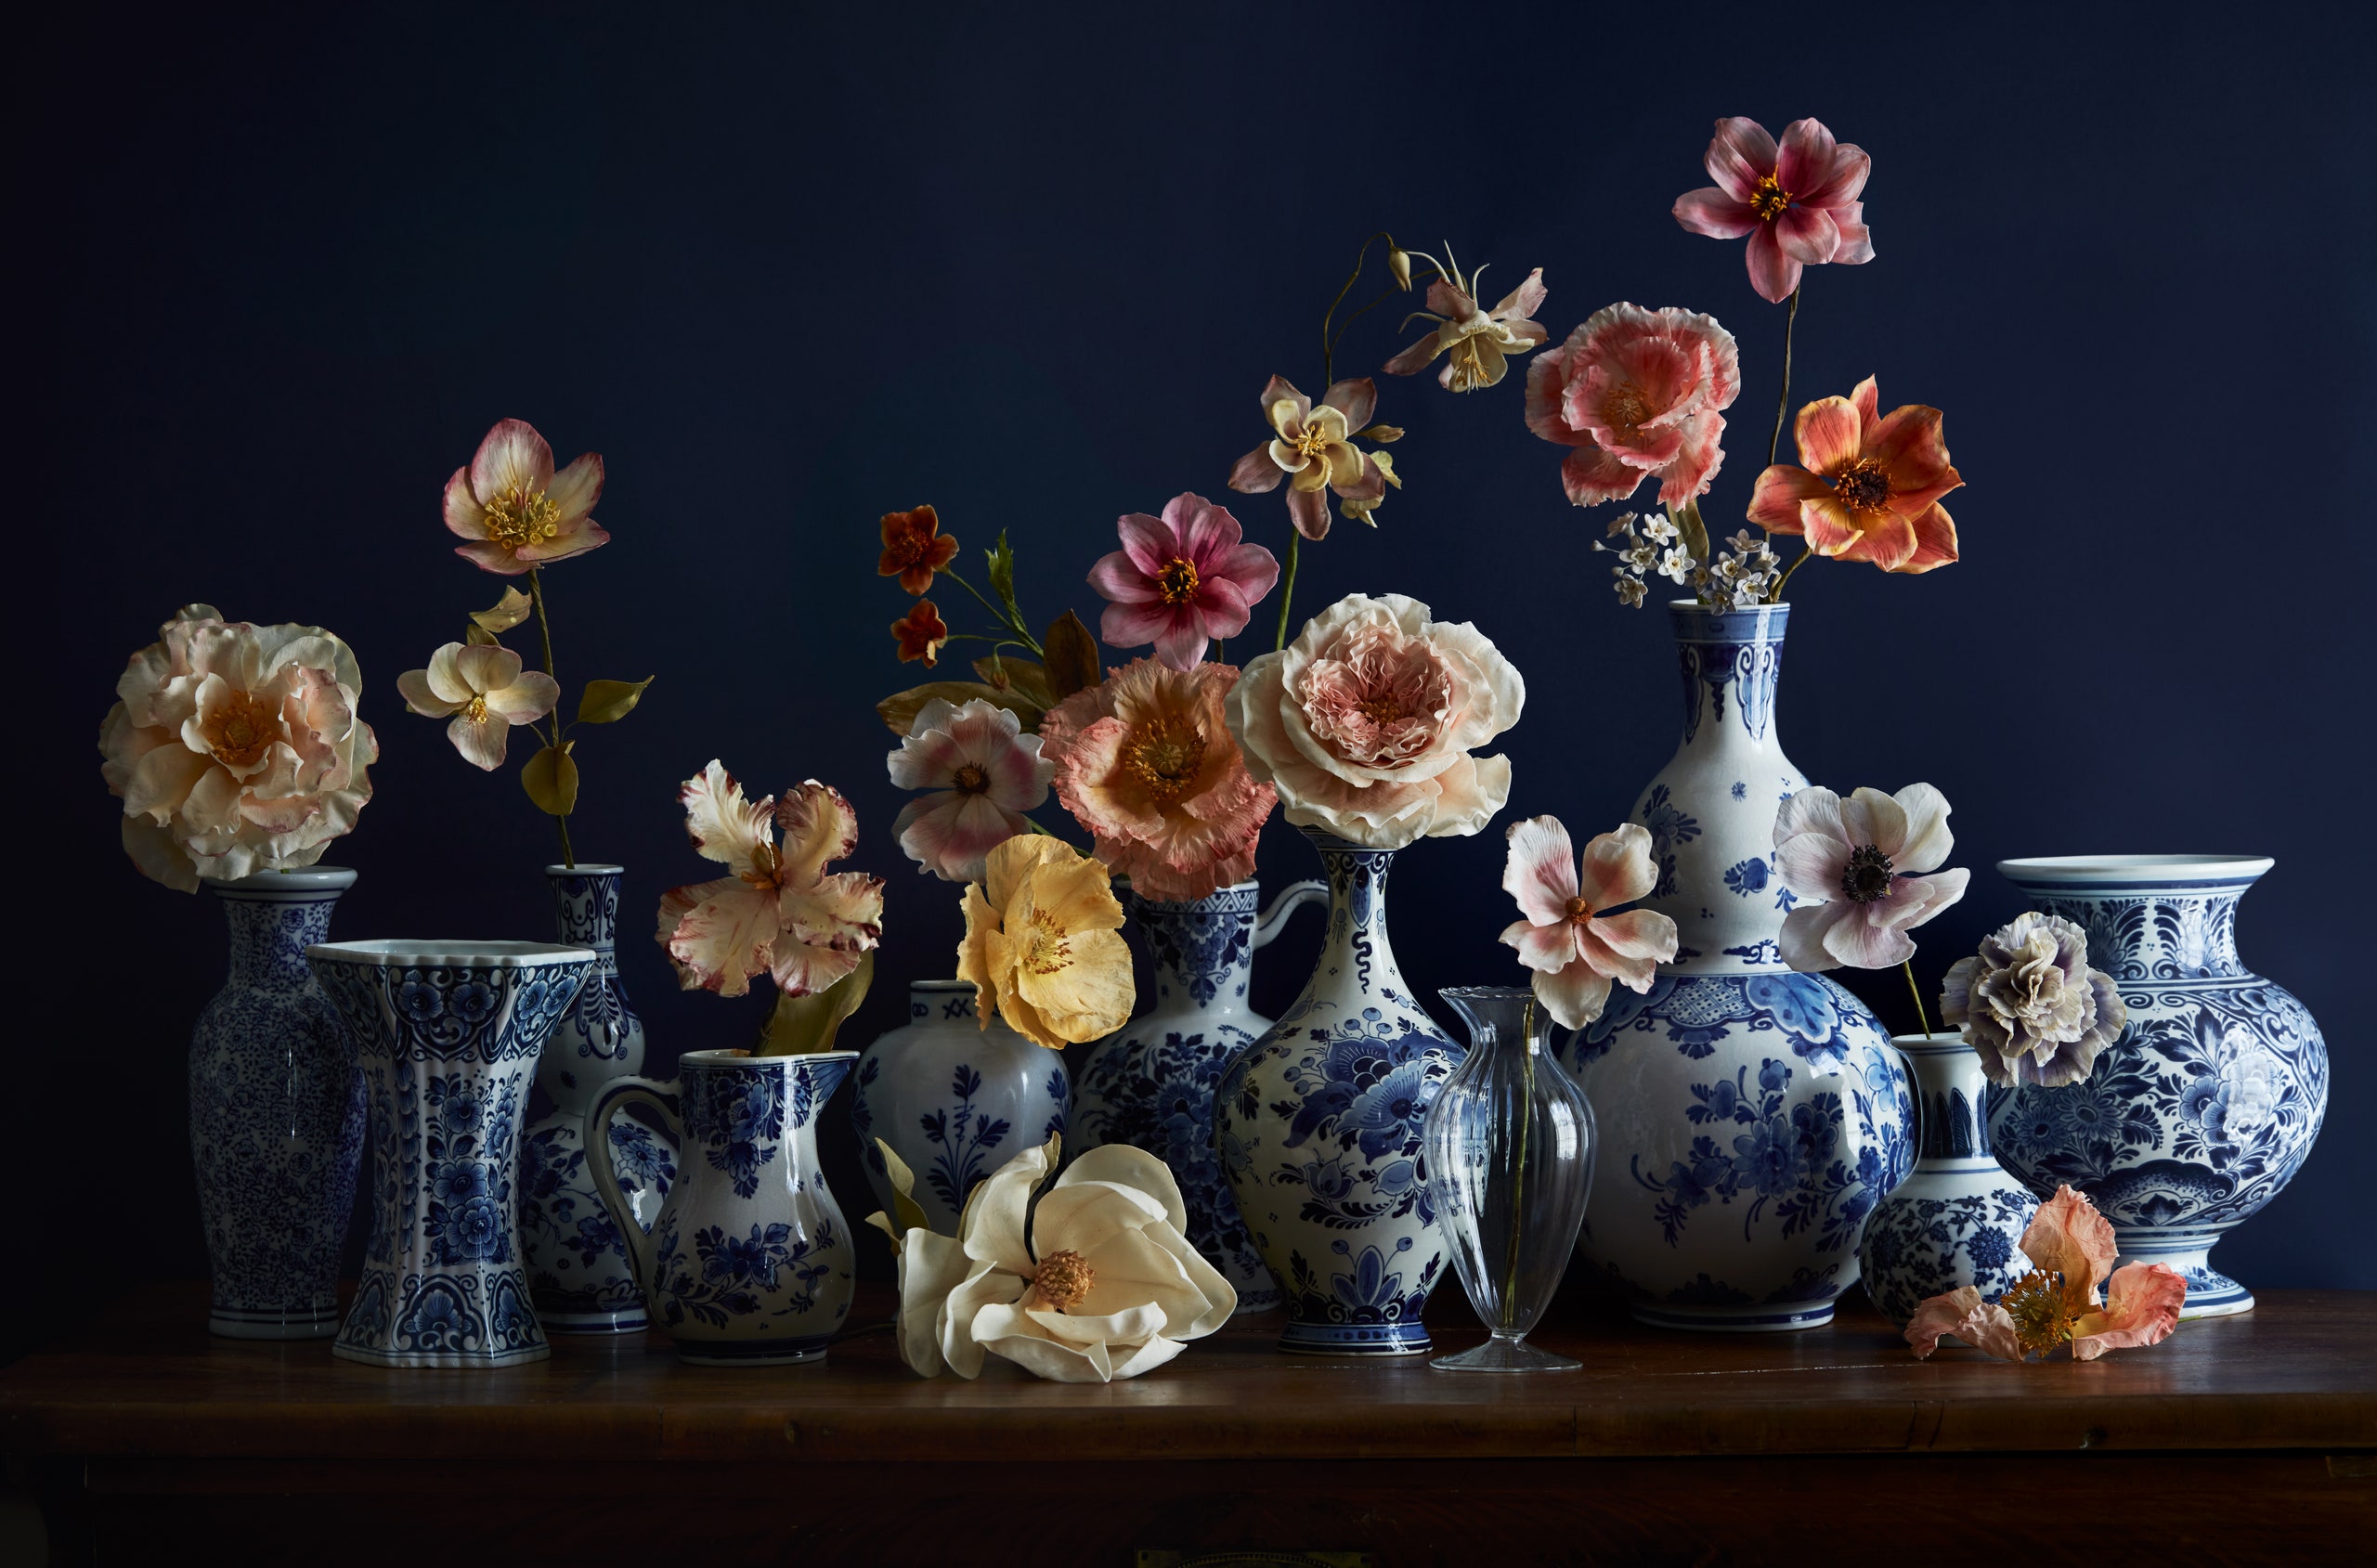 Natasja Sadi has adorned her collection of modern delftware with a confection of apricot peach and cream flowers. Each...